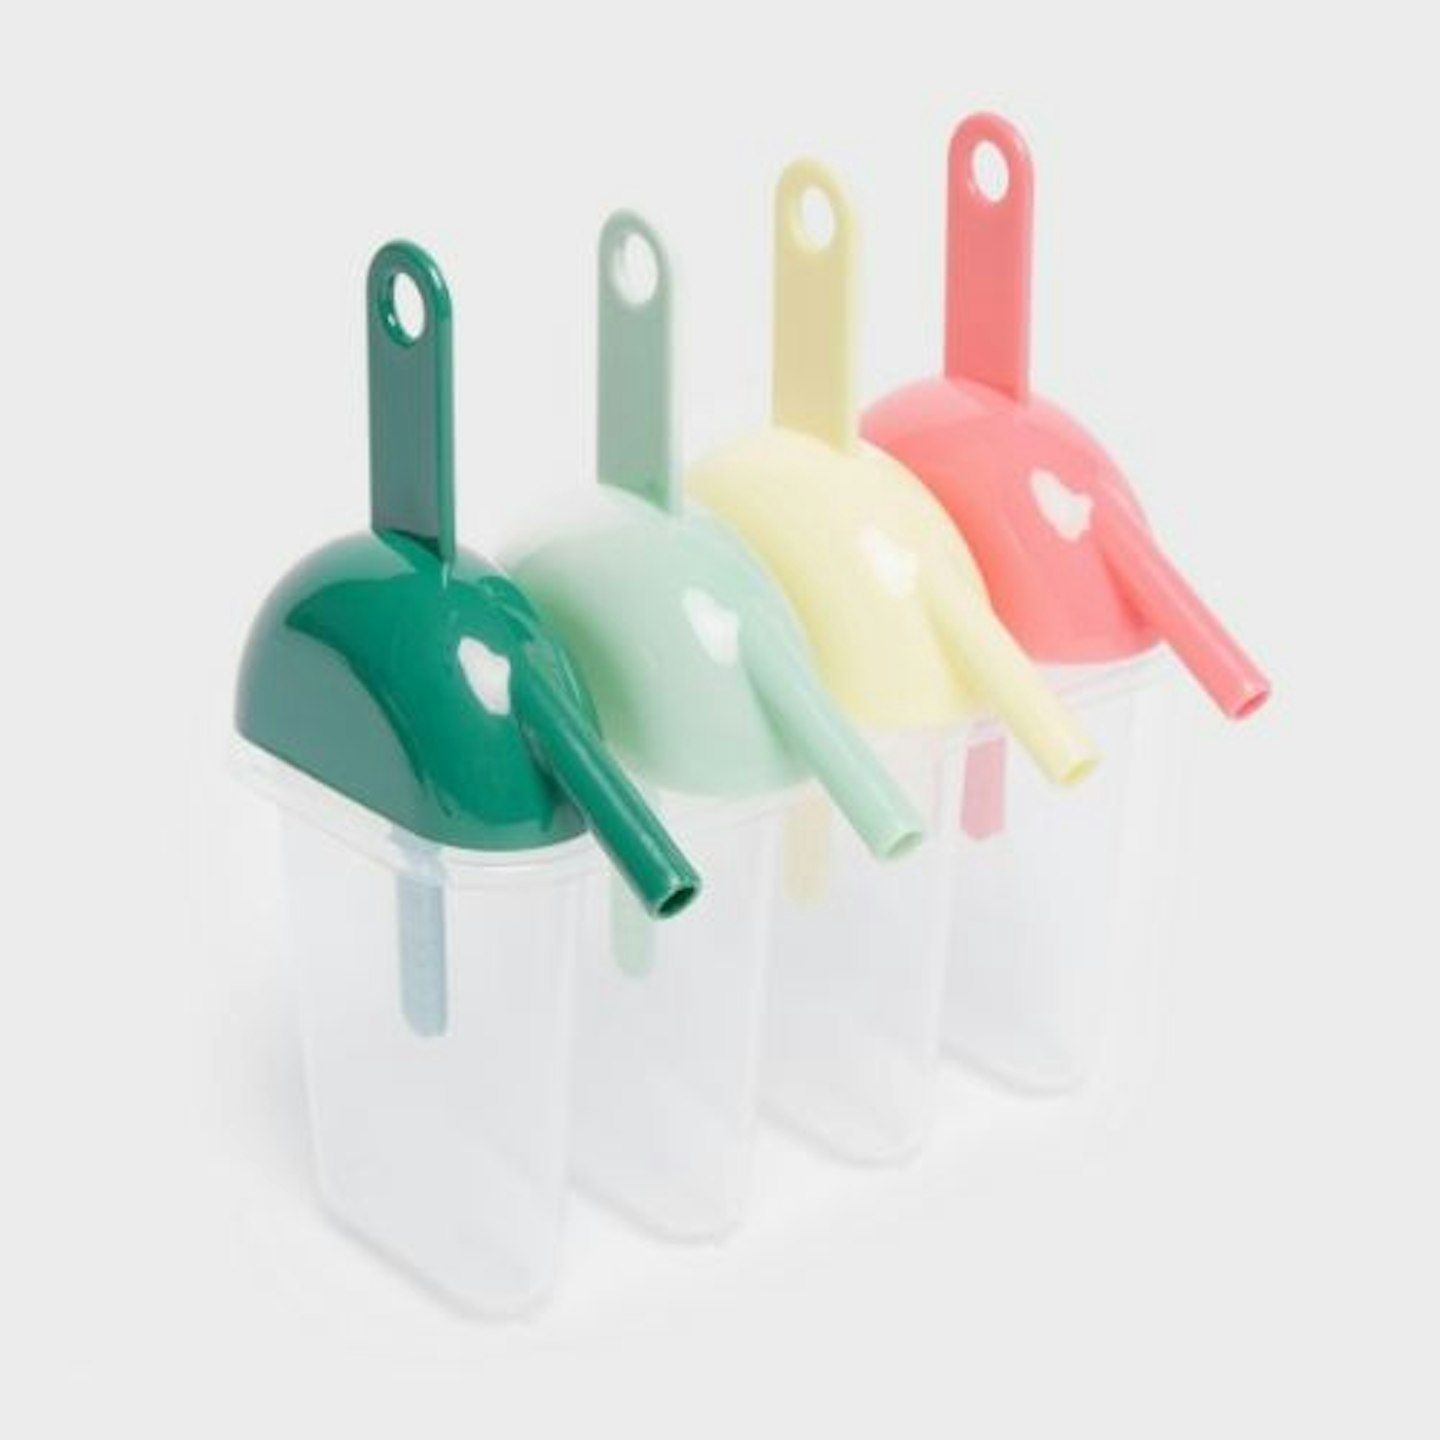 ice lolly moulds for kids